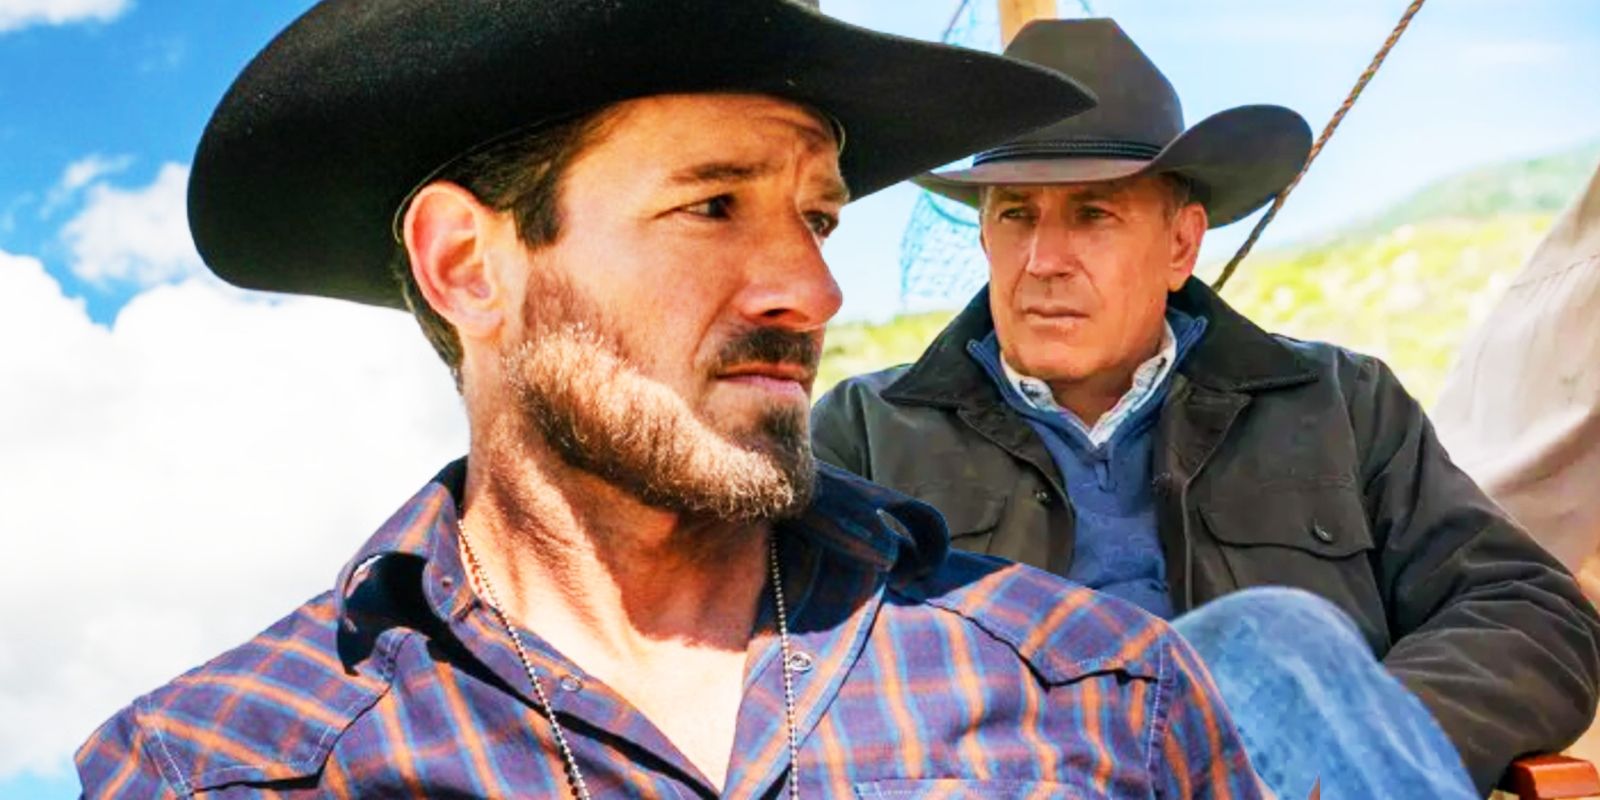 Ian Bohen as Ryan juxtaposed with Kevin Costner as John Dutton in Yellowstone